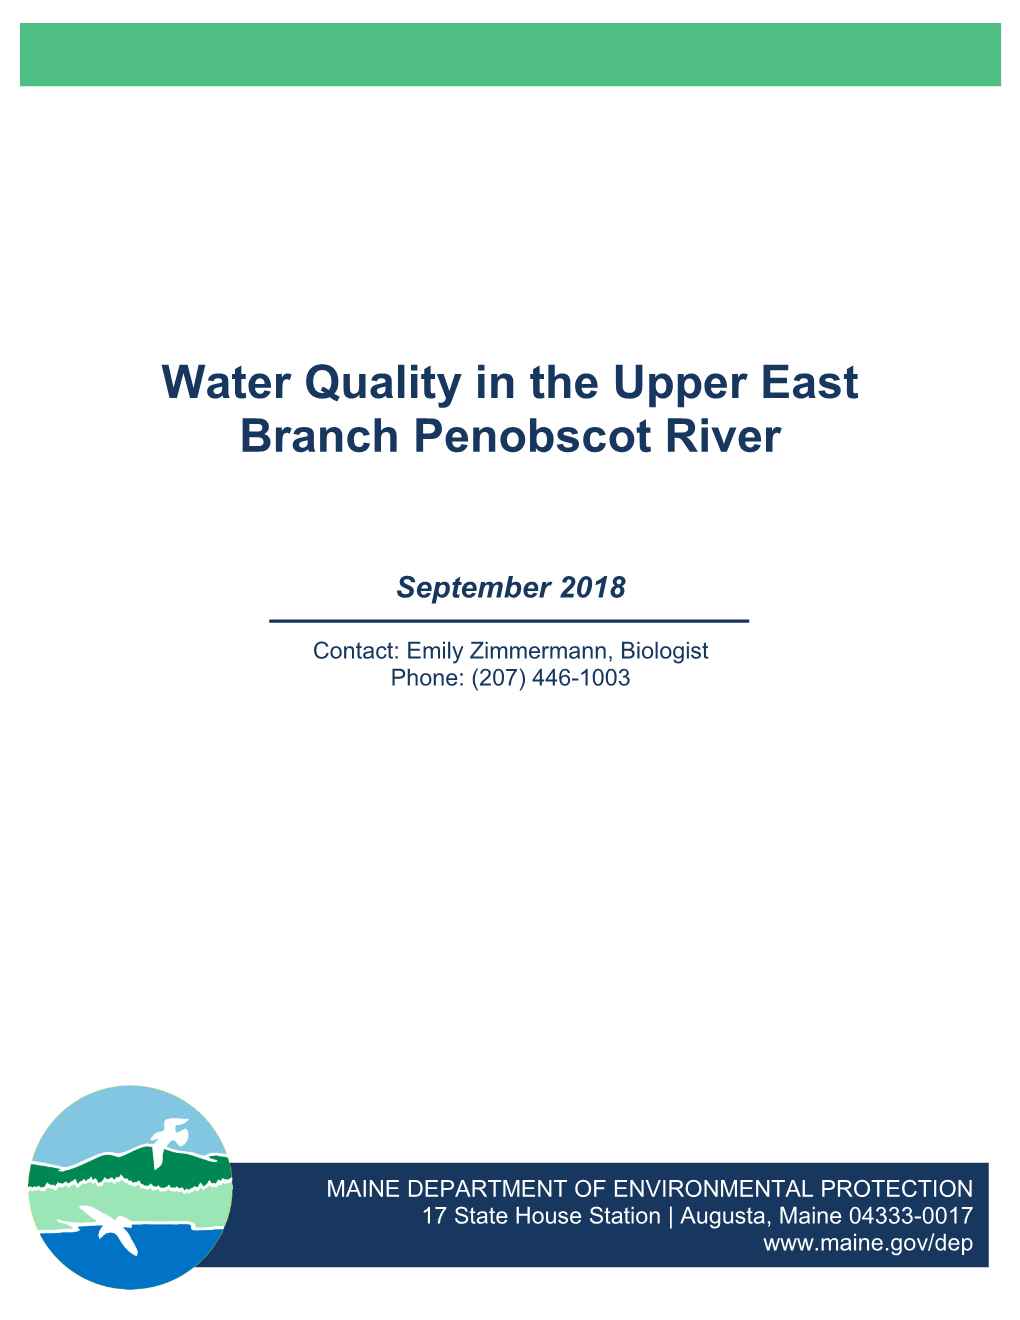 Water Quality in the Upper East Branch Penobscot River